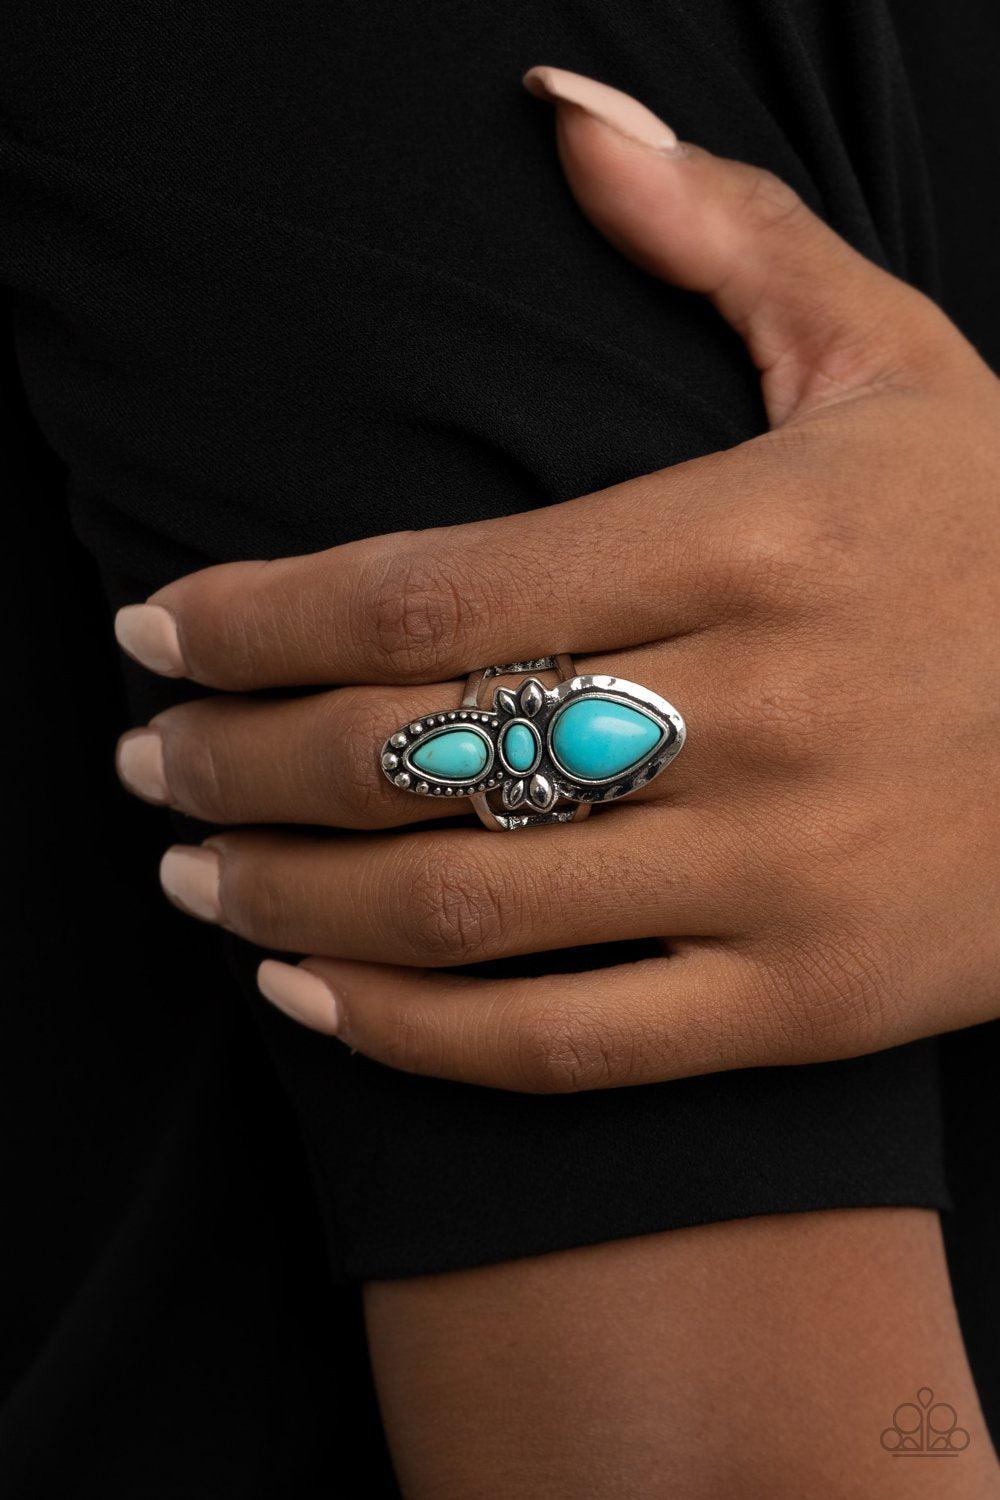 In a BADLANDS Mood Turquoise Blue Stone Ring - Paparazzi Accessories- model - CarasShop.com - $5 Jewelry by Cara Jewels